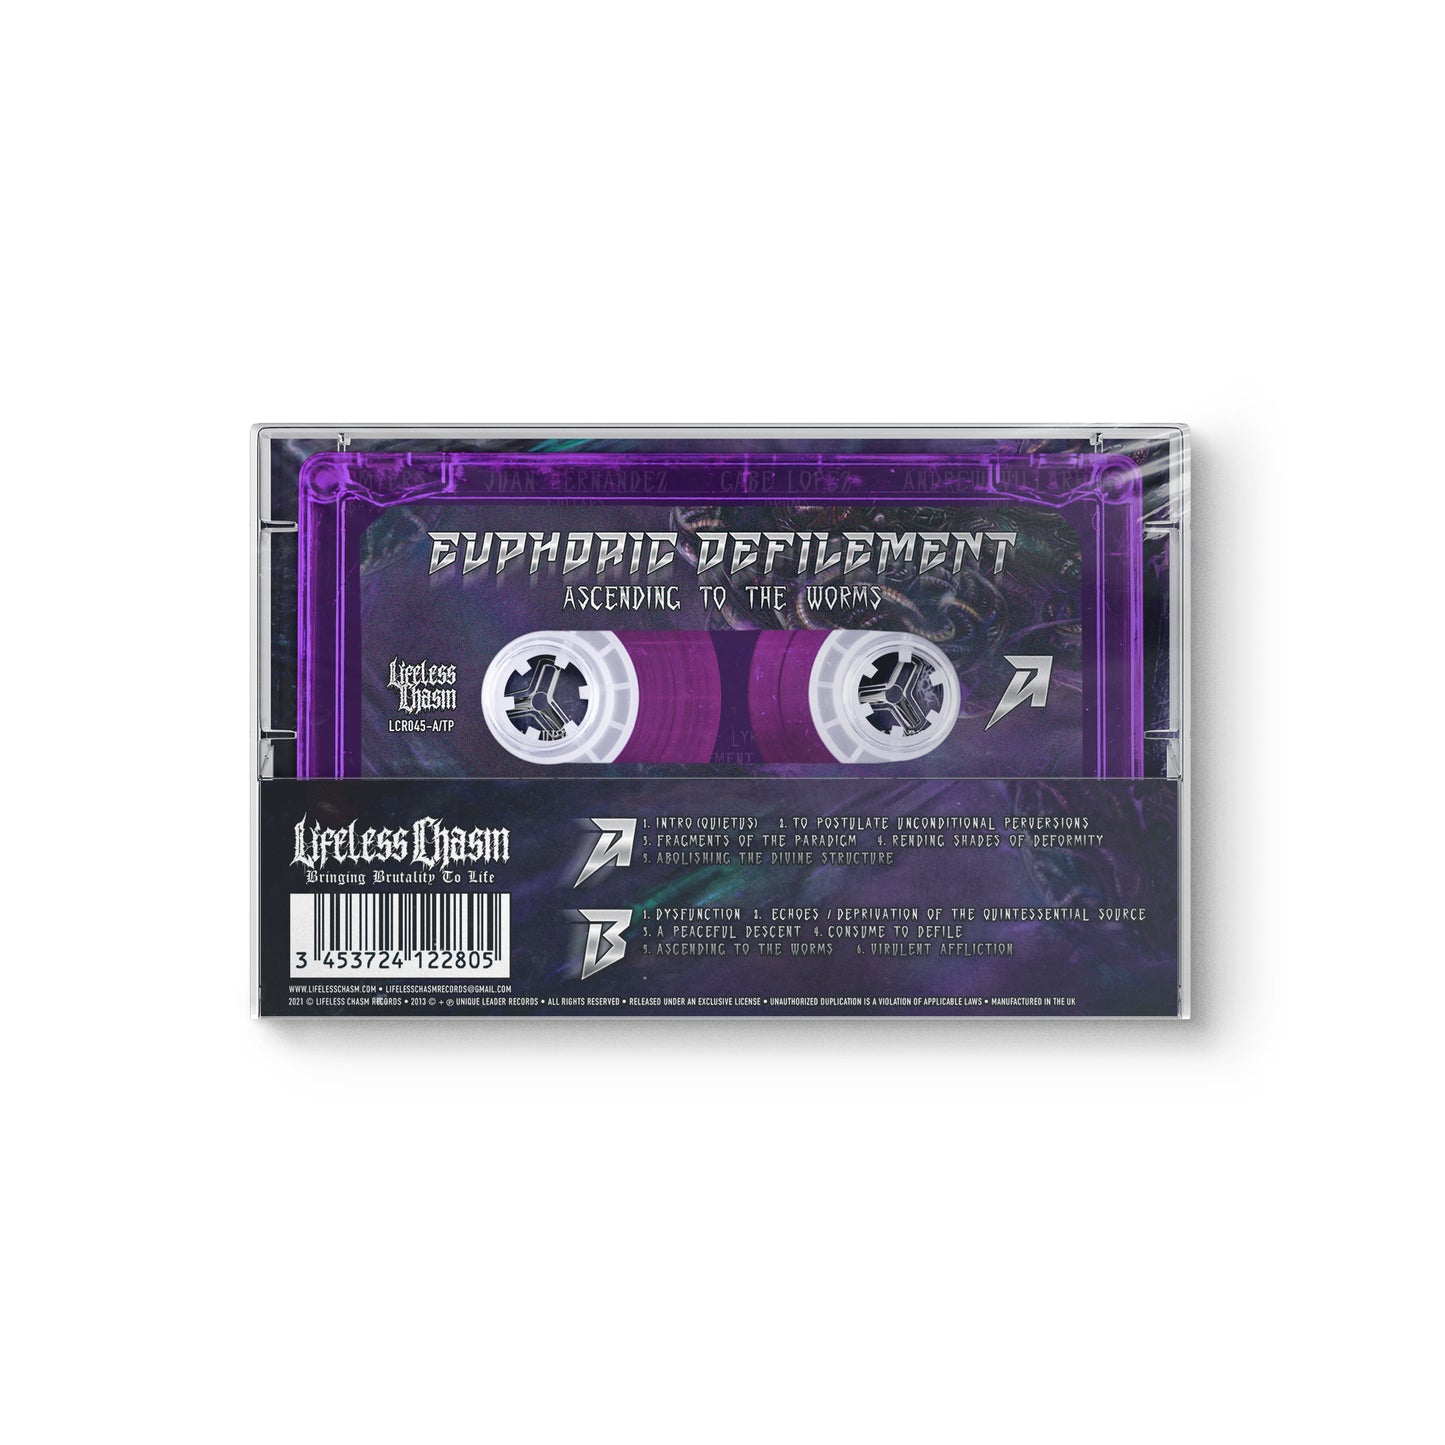 Euphoric Defilement "Ascending To The Worms" CASSETTE